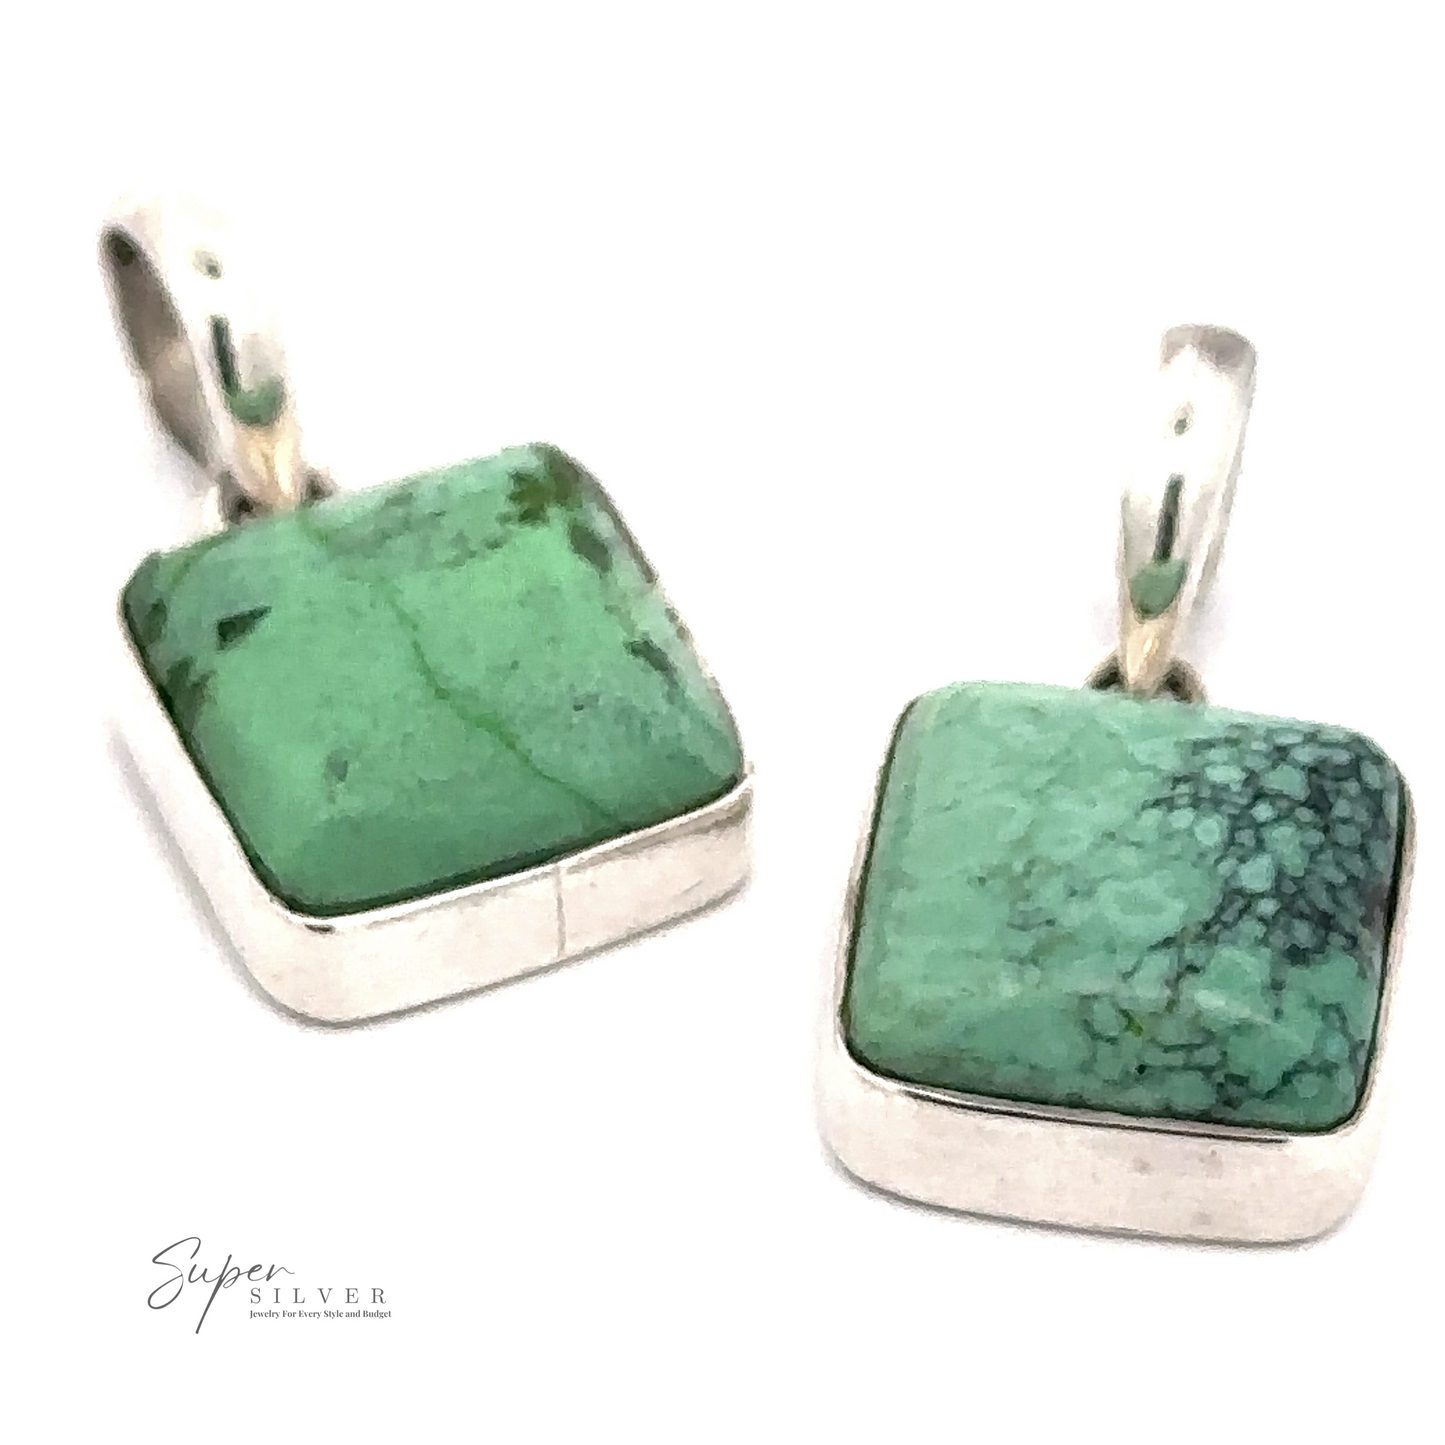 Two Natural Turquoise Square Pendants, each featuring a square green stone with marbled patterns. The minimalist design includes a loop for attaching to a chain and boasts the "Super Silver" logo in the corner. Crafted from .925 Sterling Silver, these pendants highlight natural turquoise stone accents.